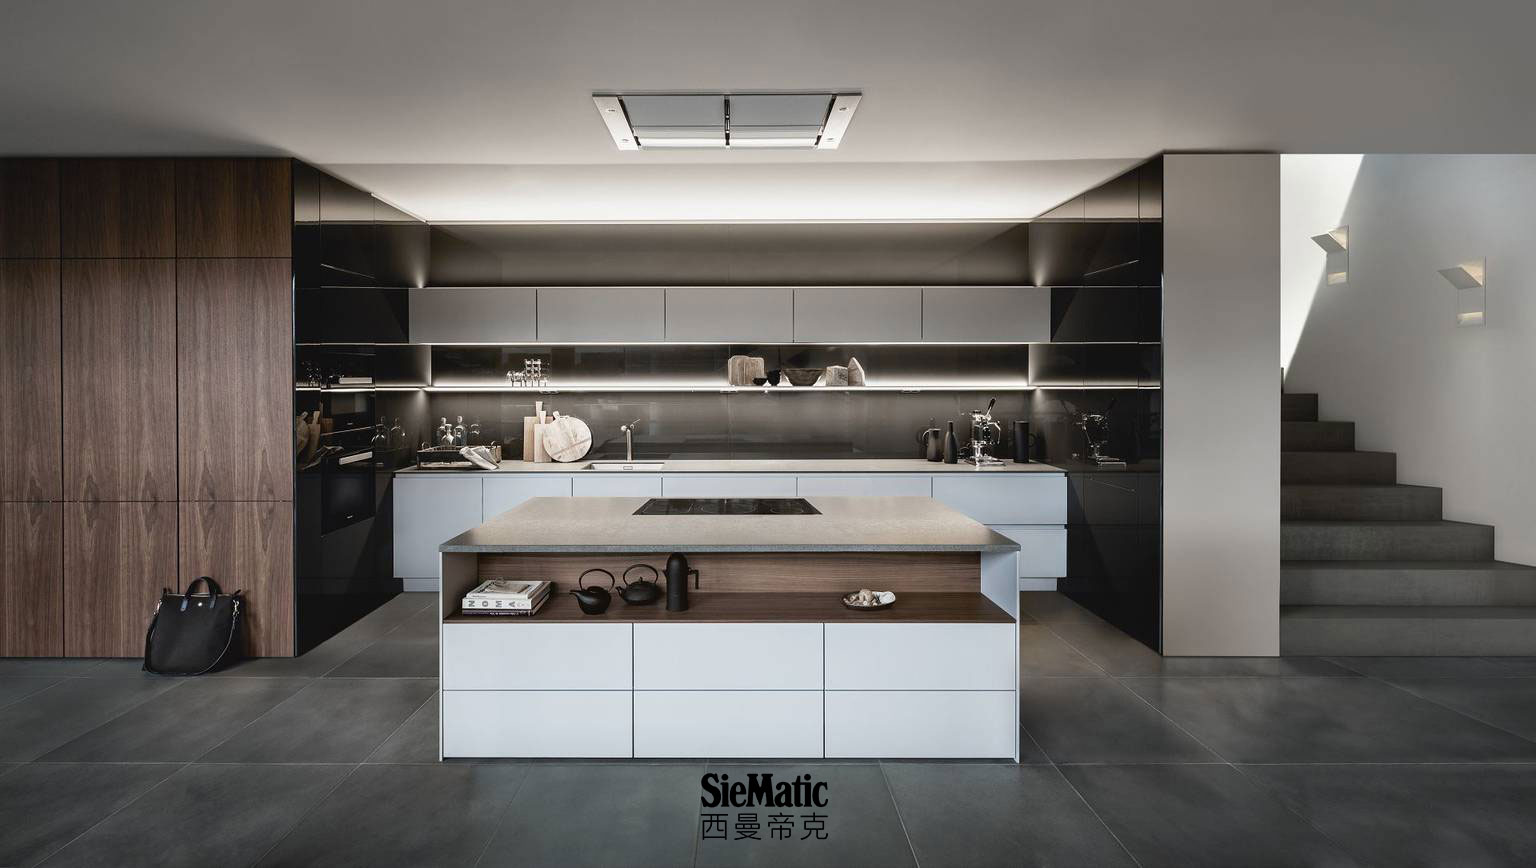 Minimalist kitchen design with SieMatic StoneDesign countertop in volcanic stone